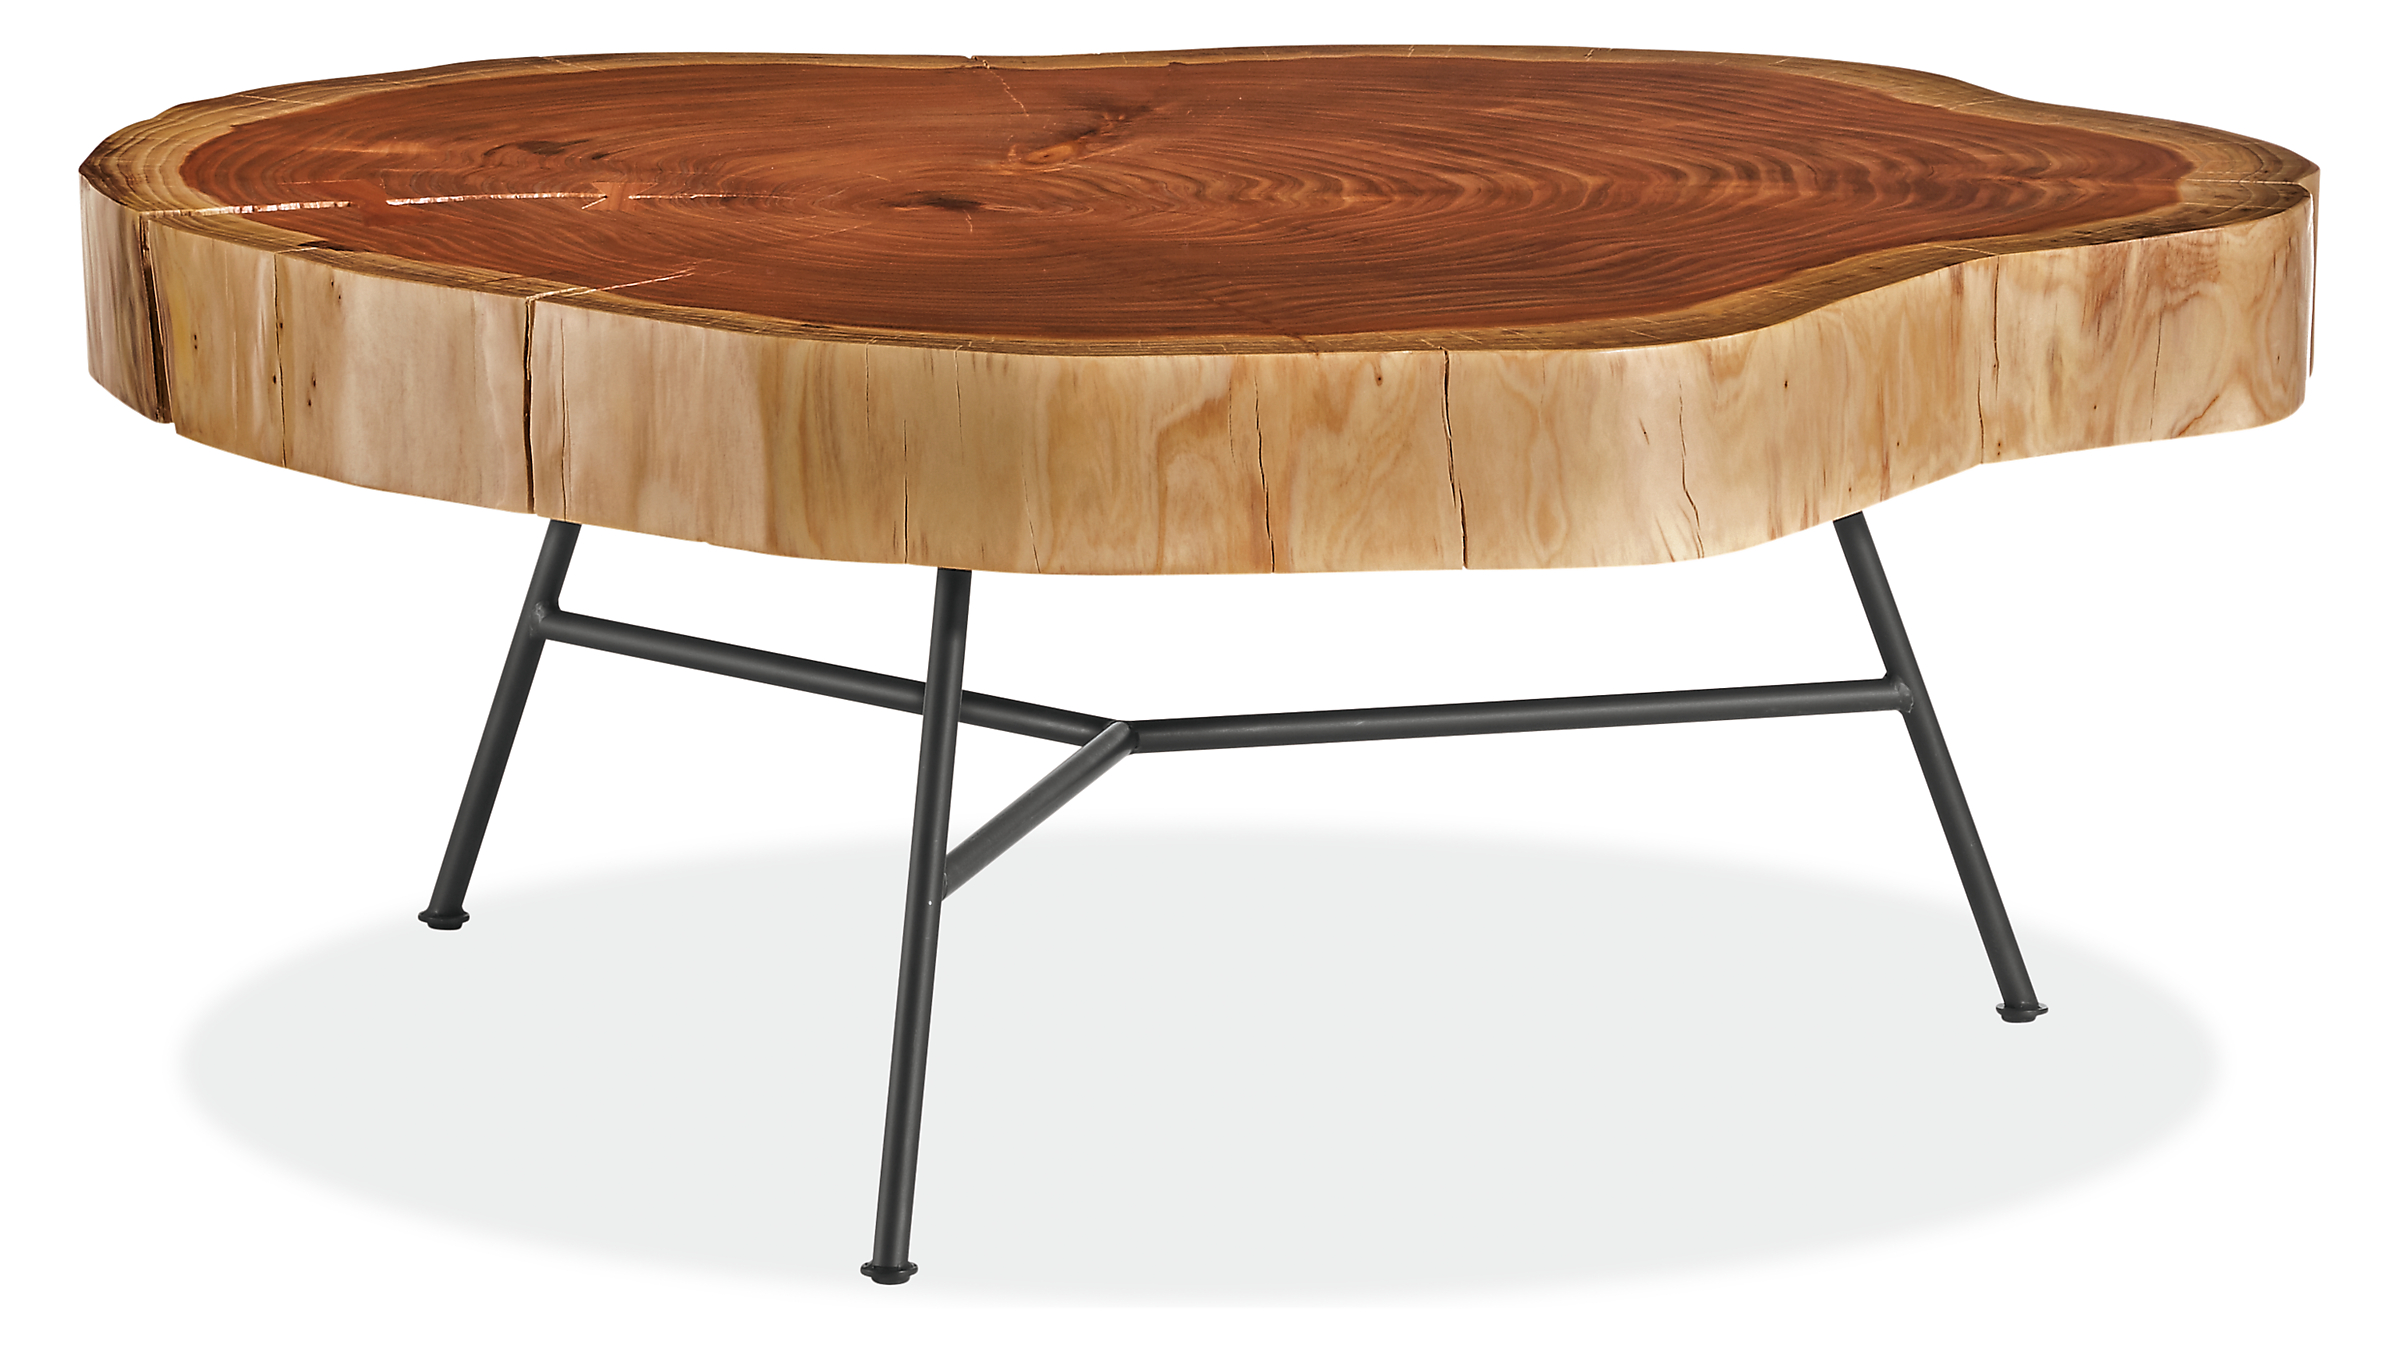 Front view of Truxel 34-42 diam Table in Redwood.